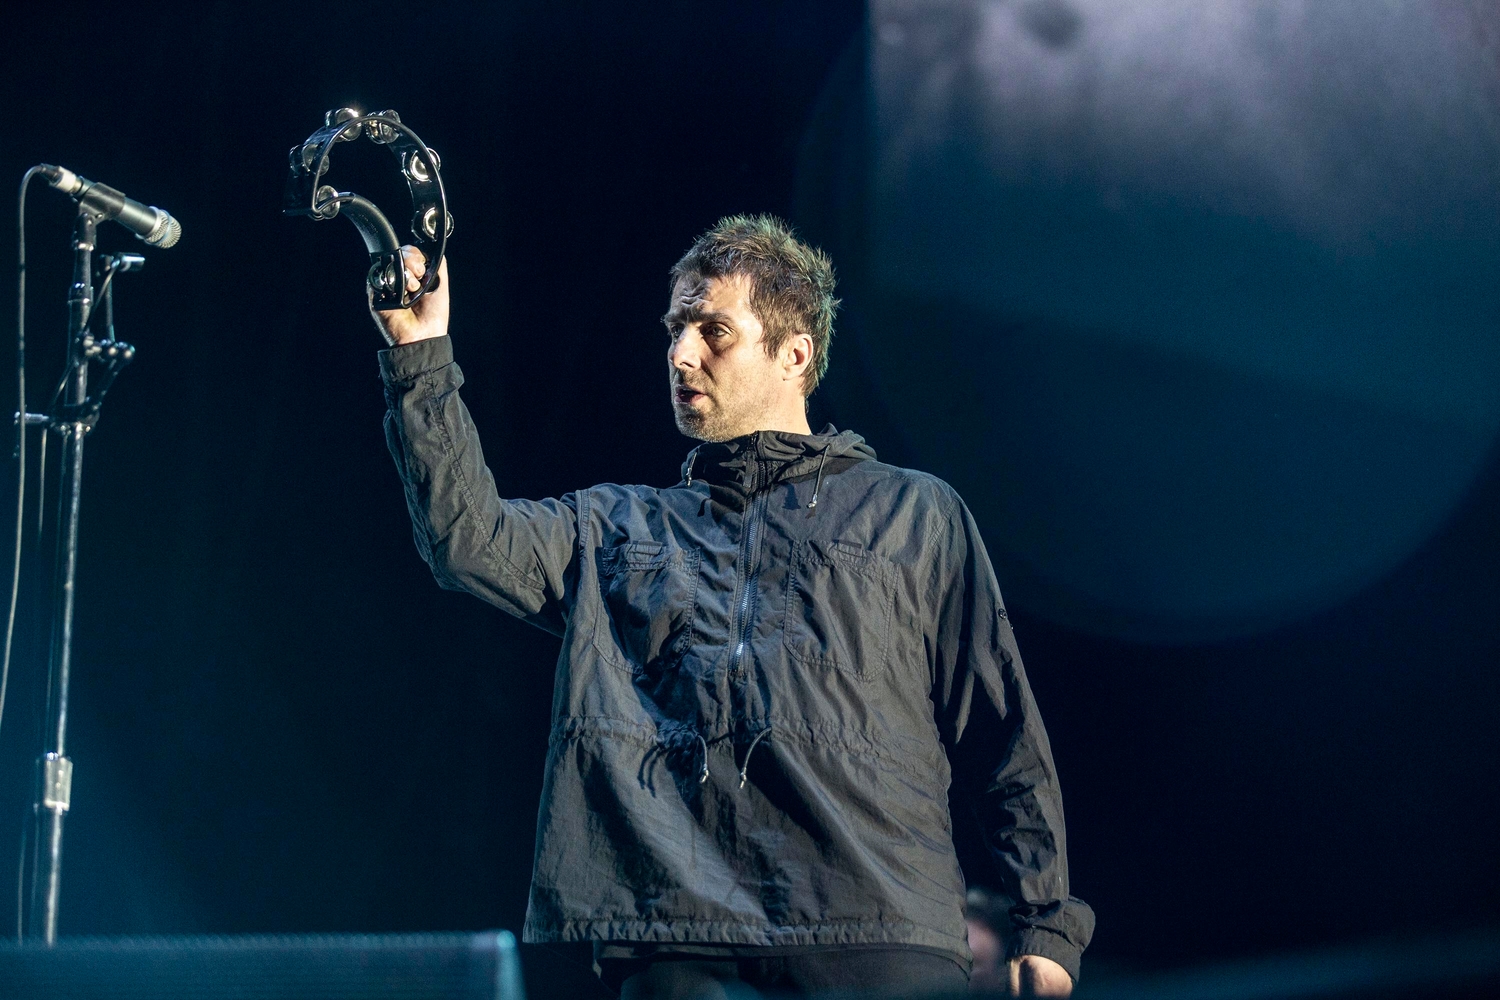 Someone threw a fish at Liam Gallagher on stage, plus the best of the rest from Day Four of Benicassim